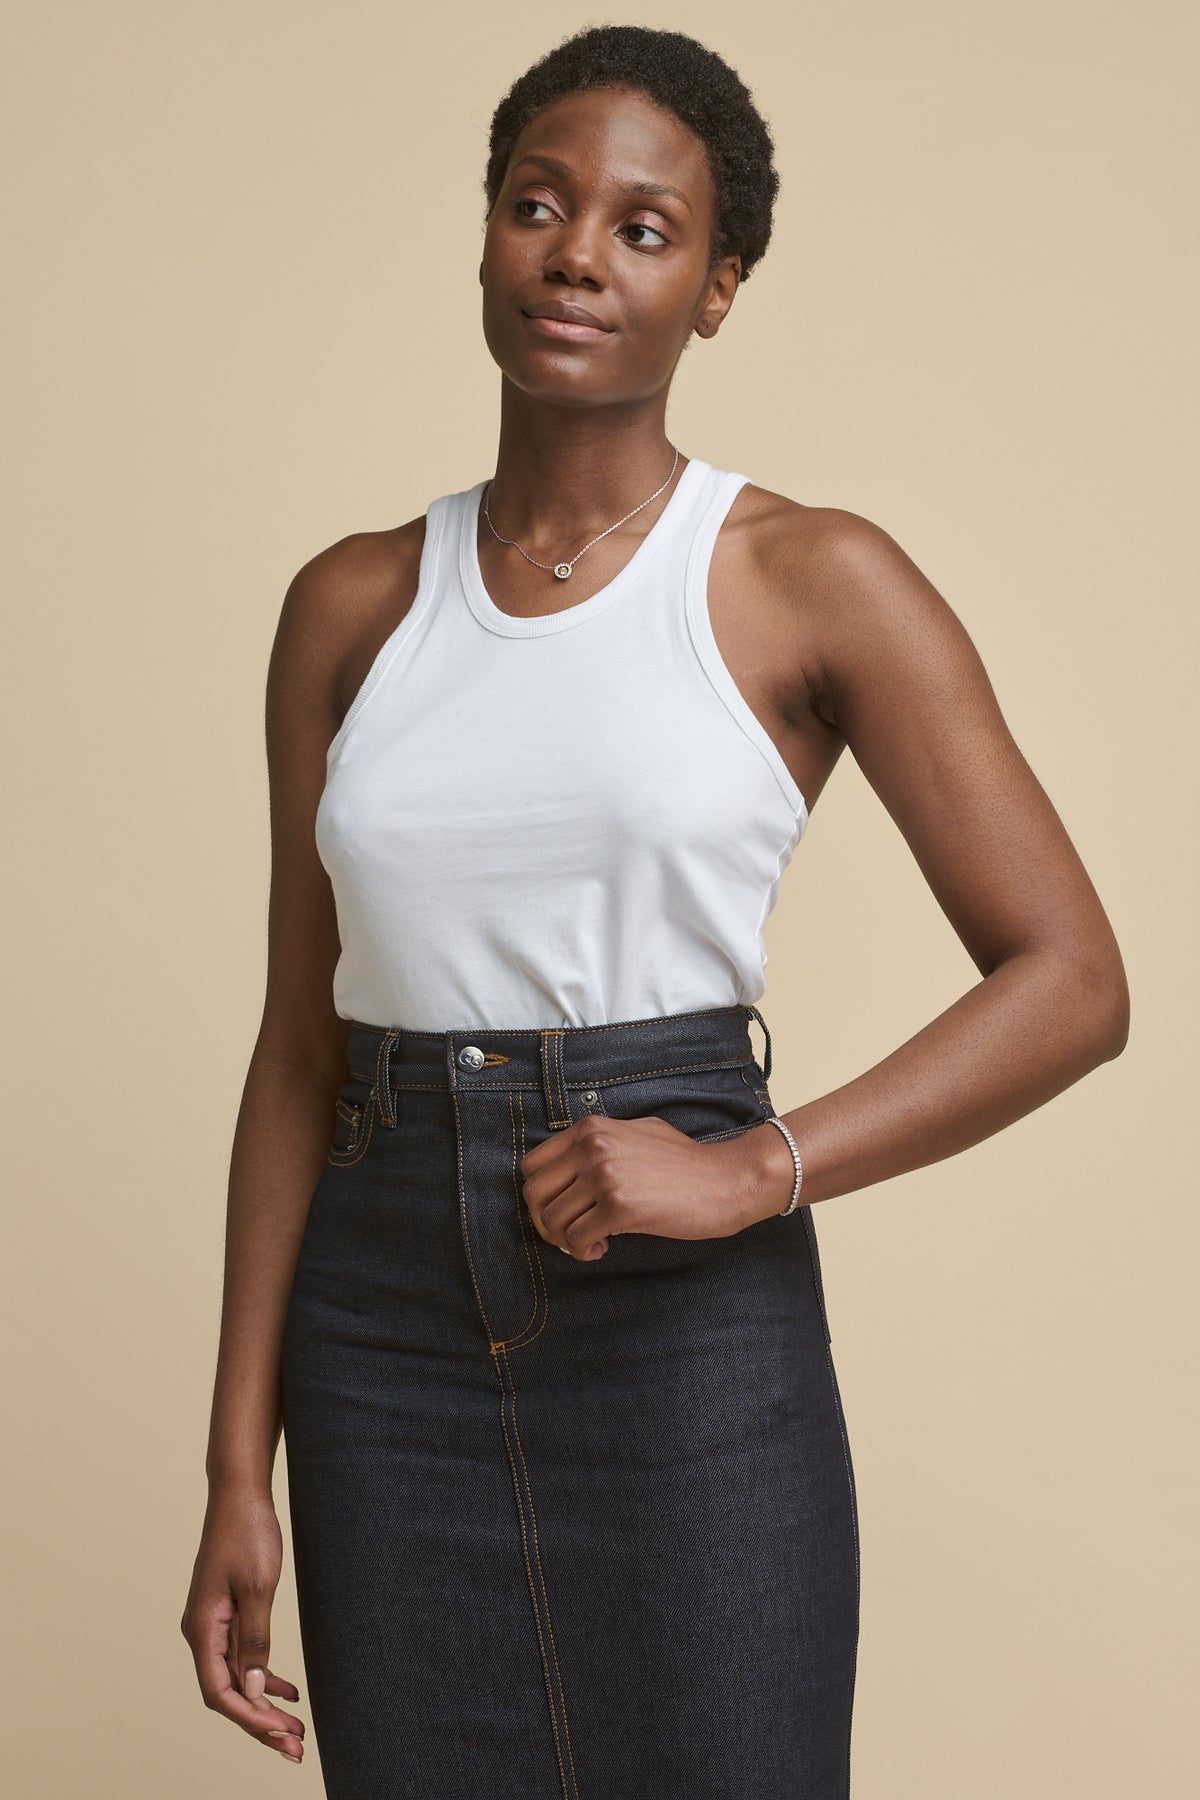 
            Thigh up image of the front of black female wearing racer back vest in white